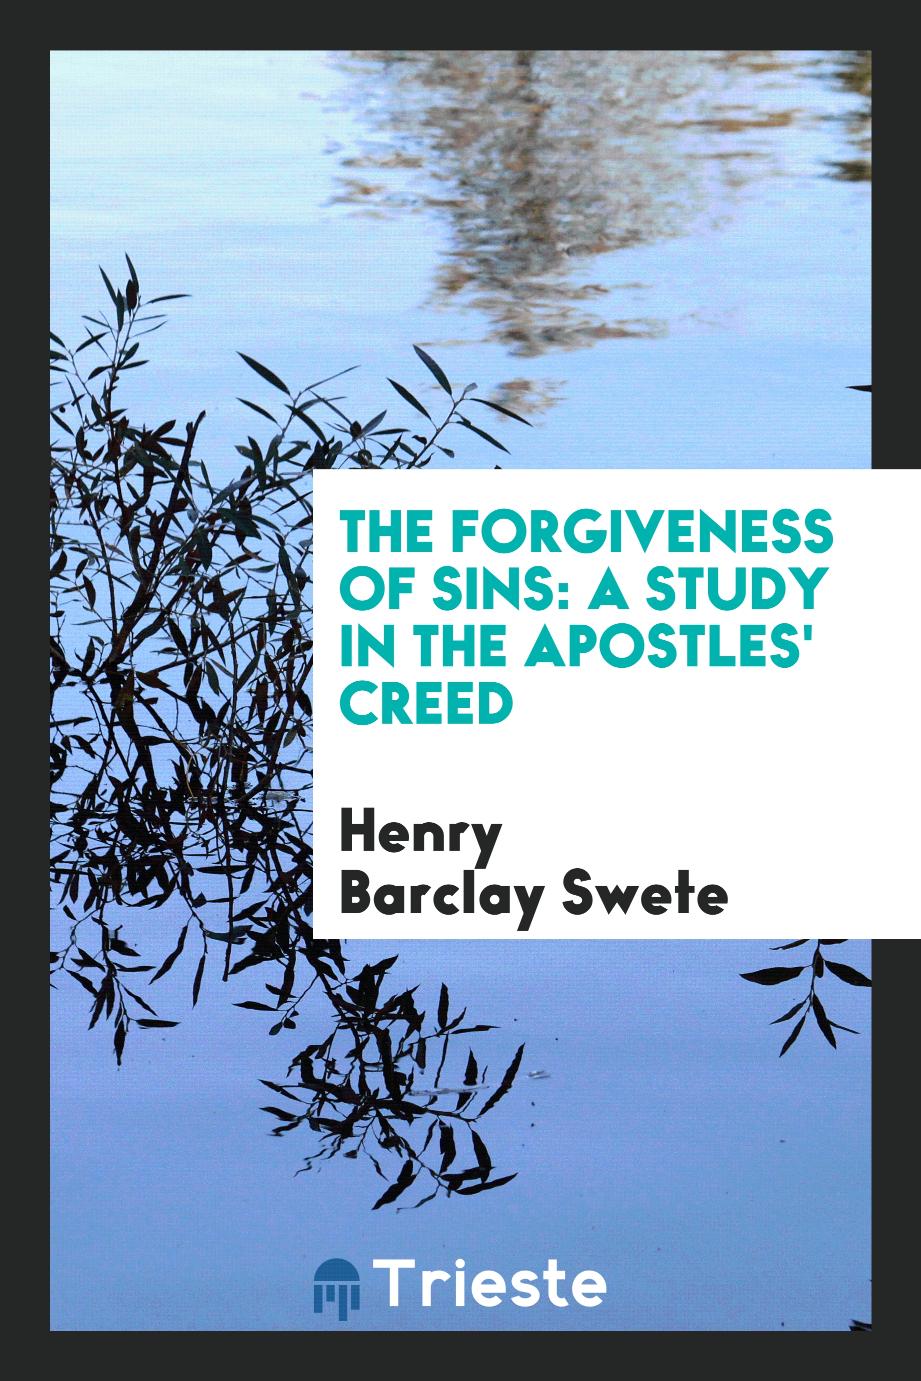 The forgiveness of sins: a study in the Apostles' creed